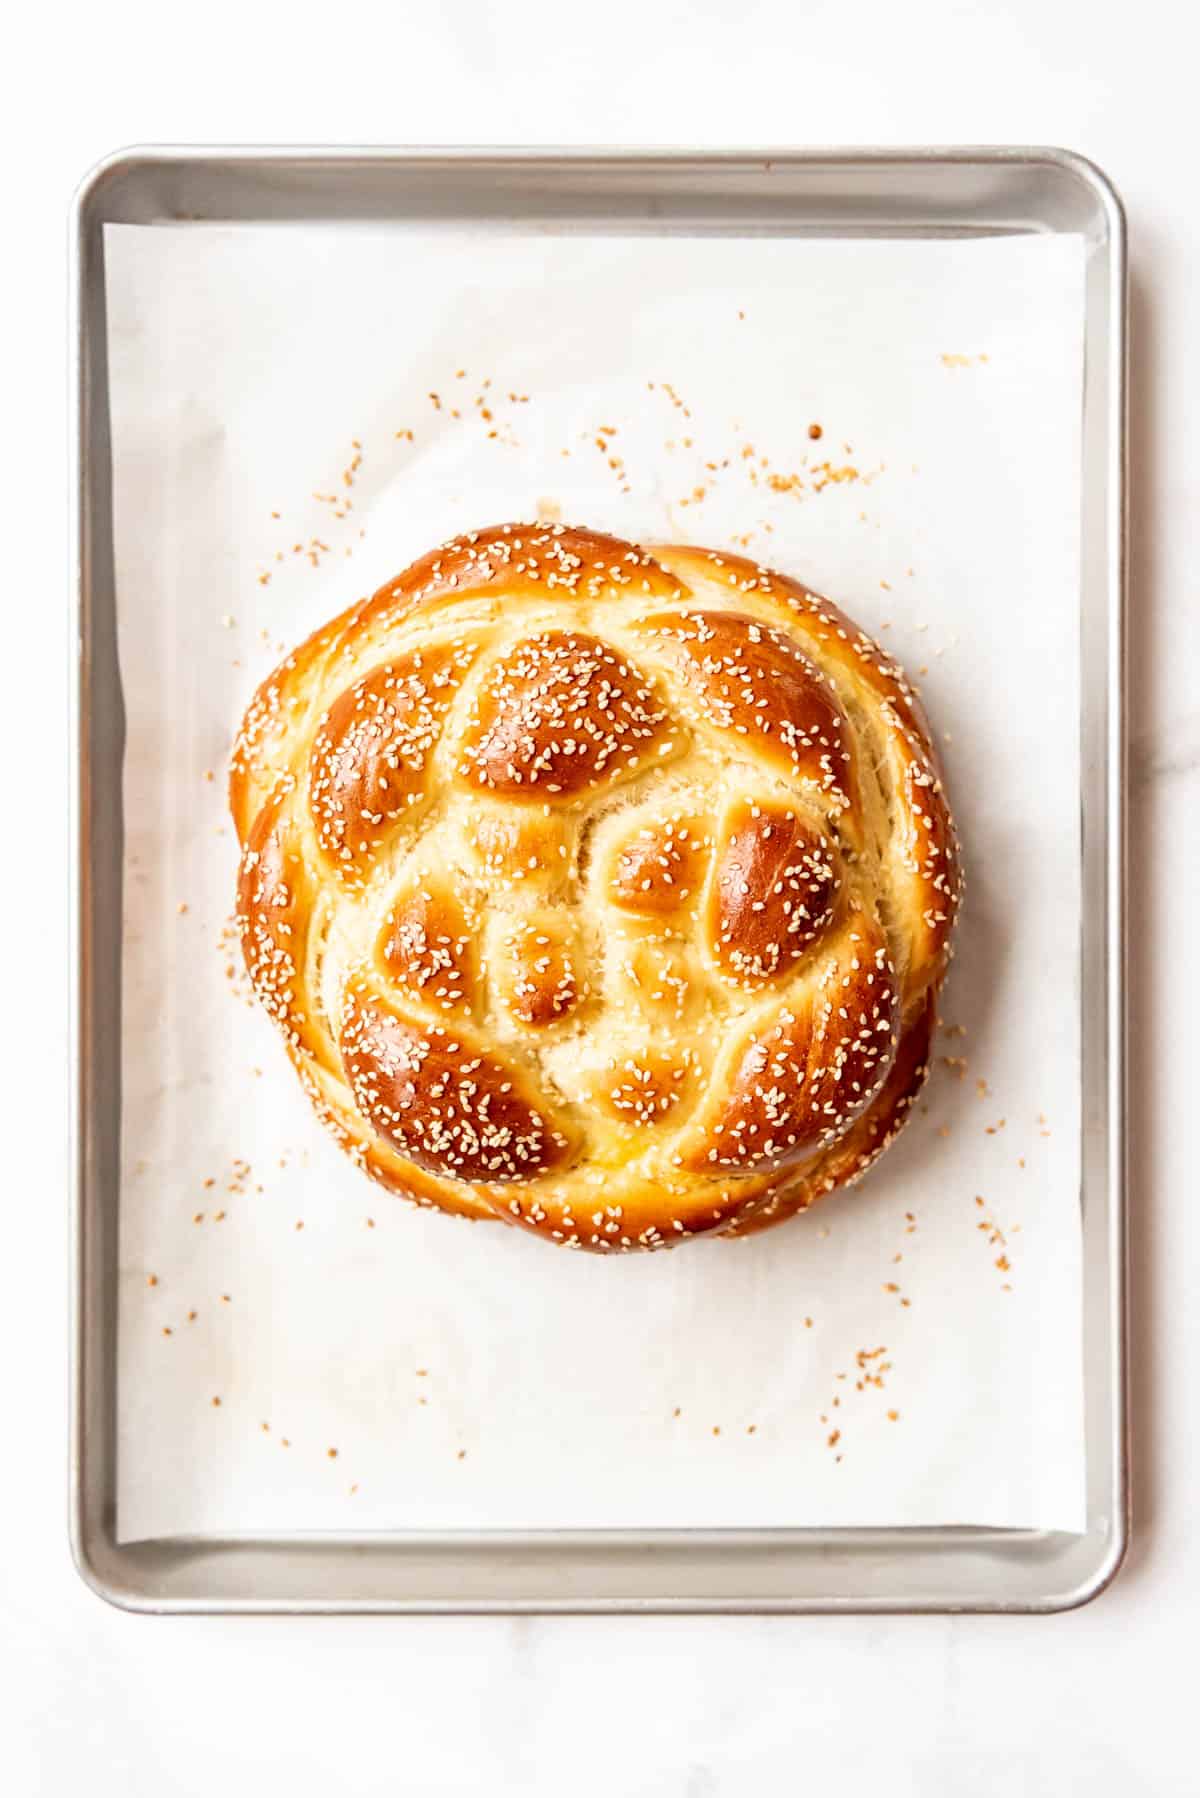 A round loaf of braided challah bread with sesame seeds on a baking sheet lined with parchment paper.